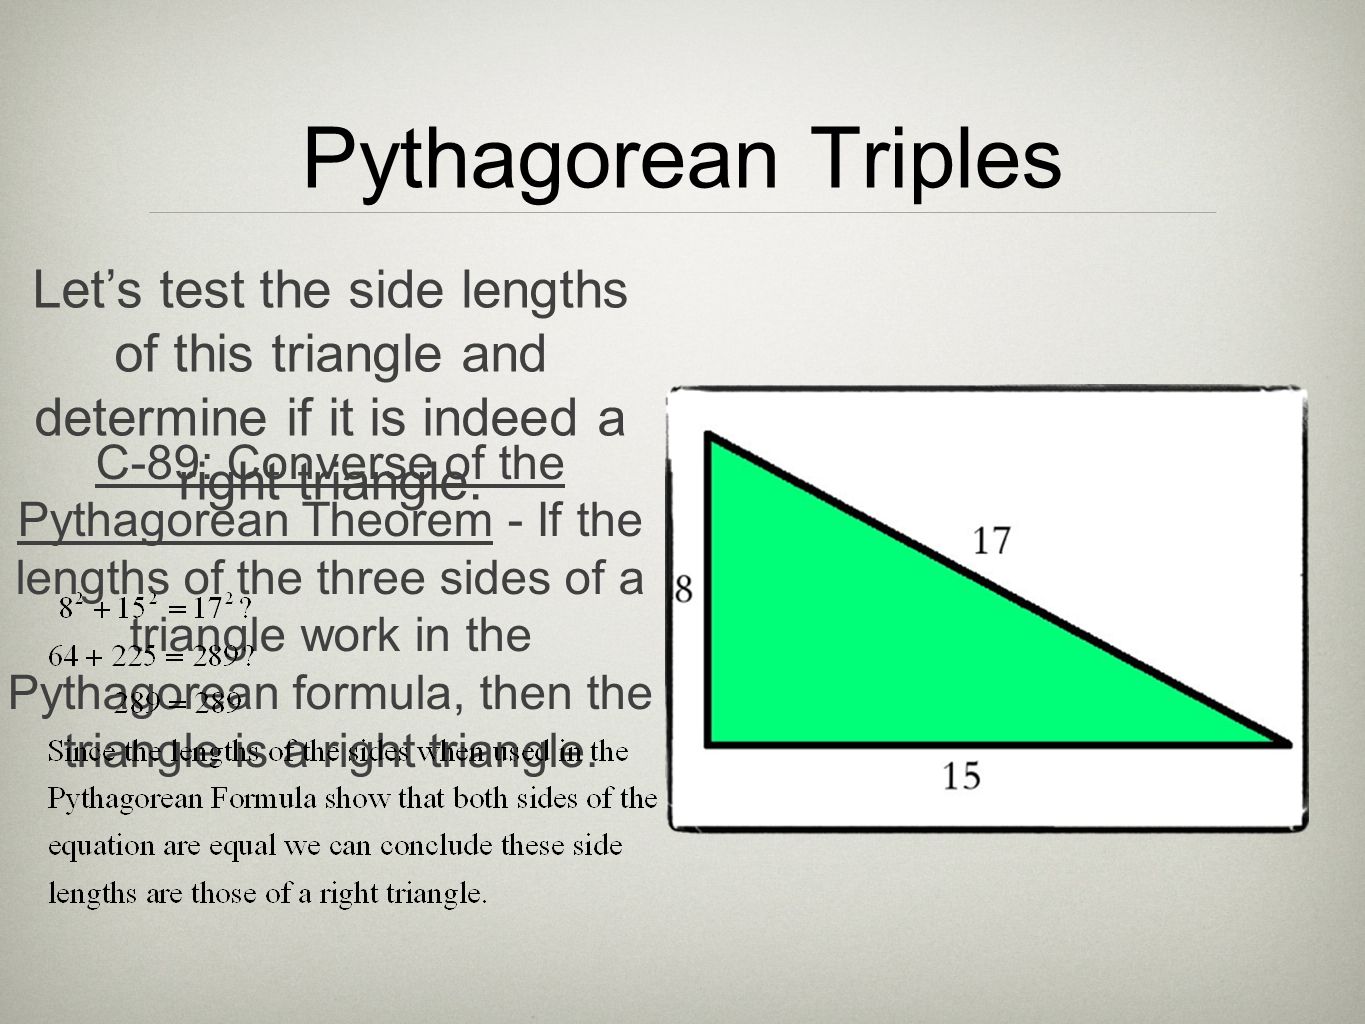 Pythagorean Triples C-89: Converse of the Pythagorean Theorem - If the lengths of the three sides of a triangle work in the Pythagorean formula, then the triangle is a right triangle.